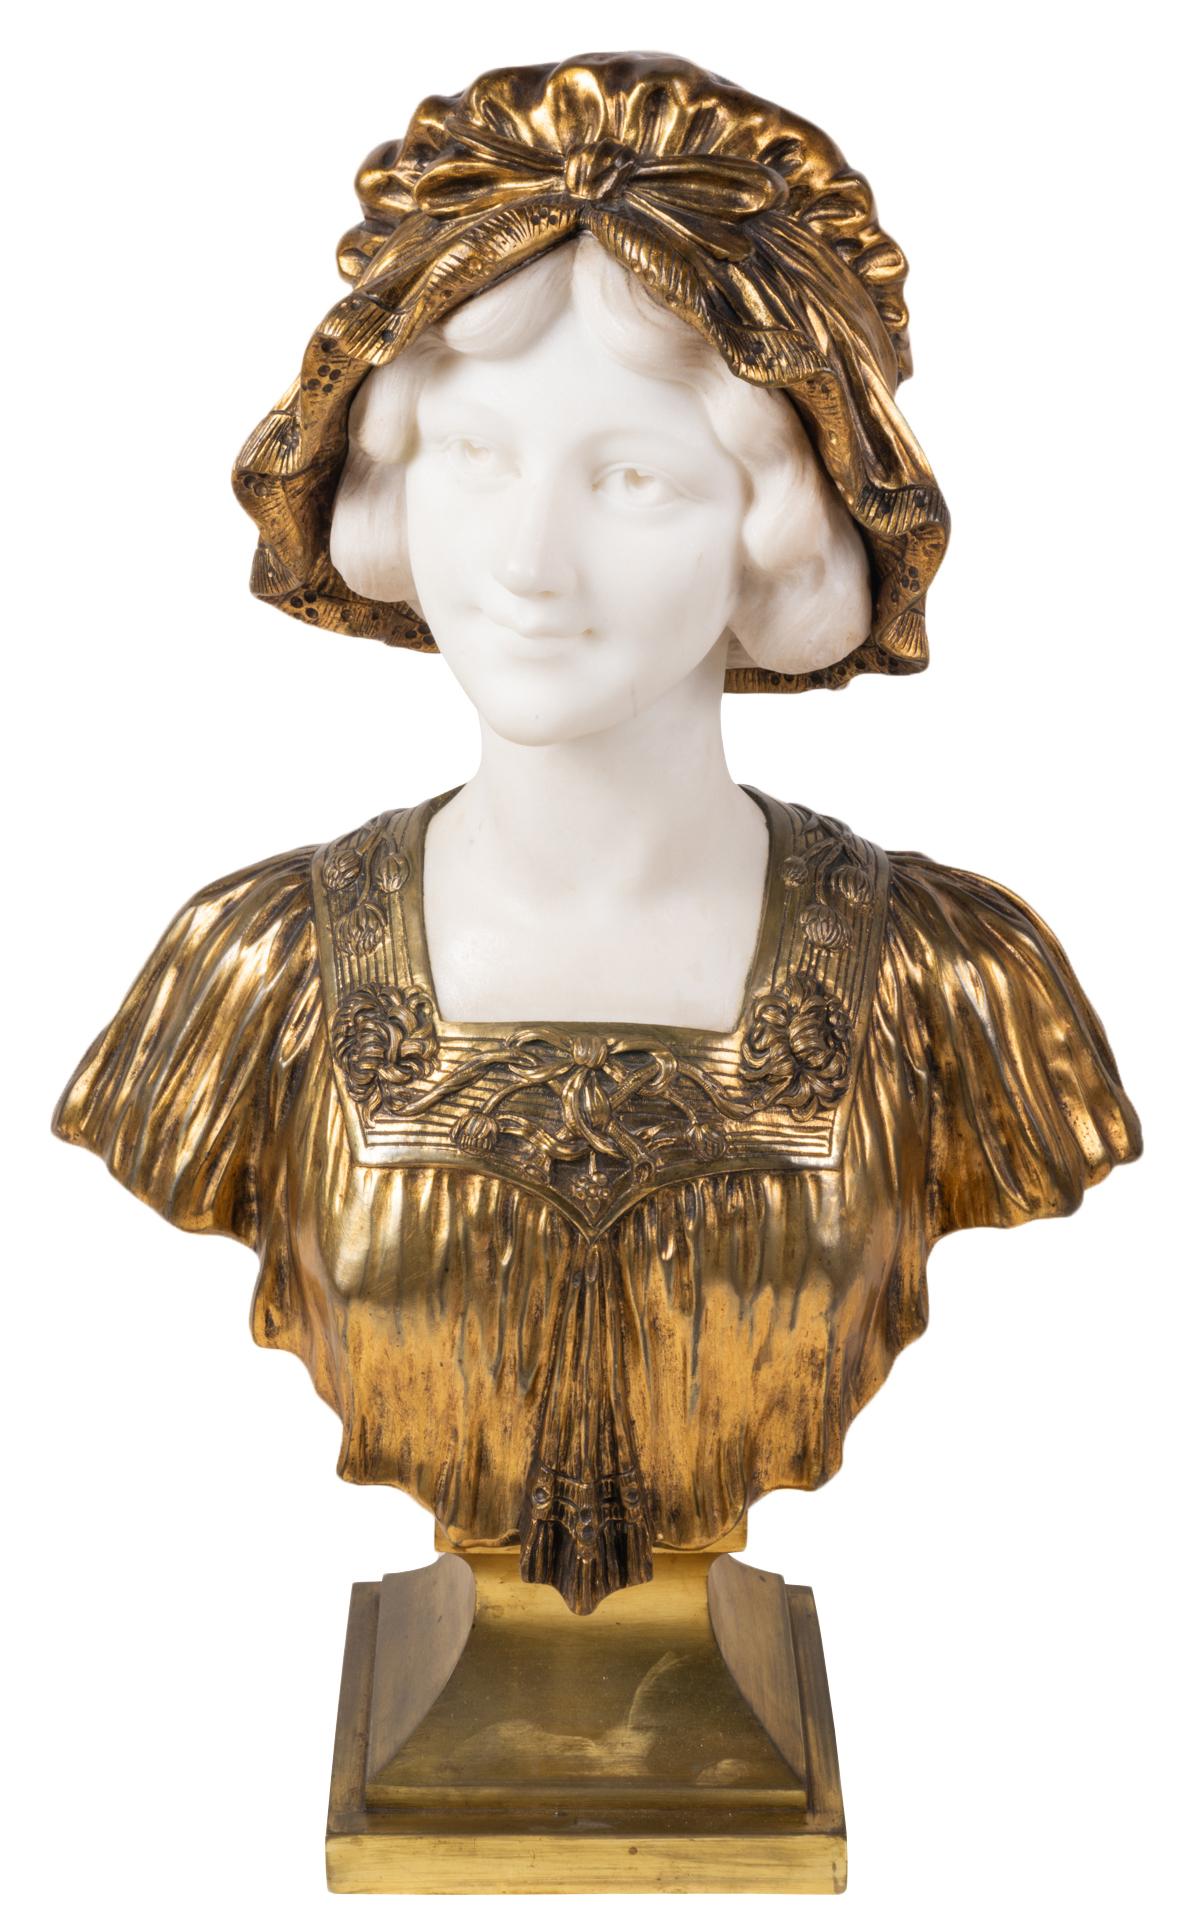 A classical 19th century Italian marble and gilded bronze bust of a pretty young girl wearing a bonnet,
circa 1880.
Signed: Giovanni Battista Ferrari (Italian, 1829-1906).